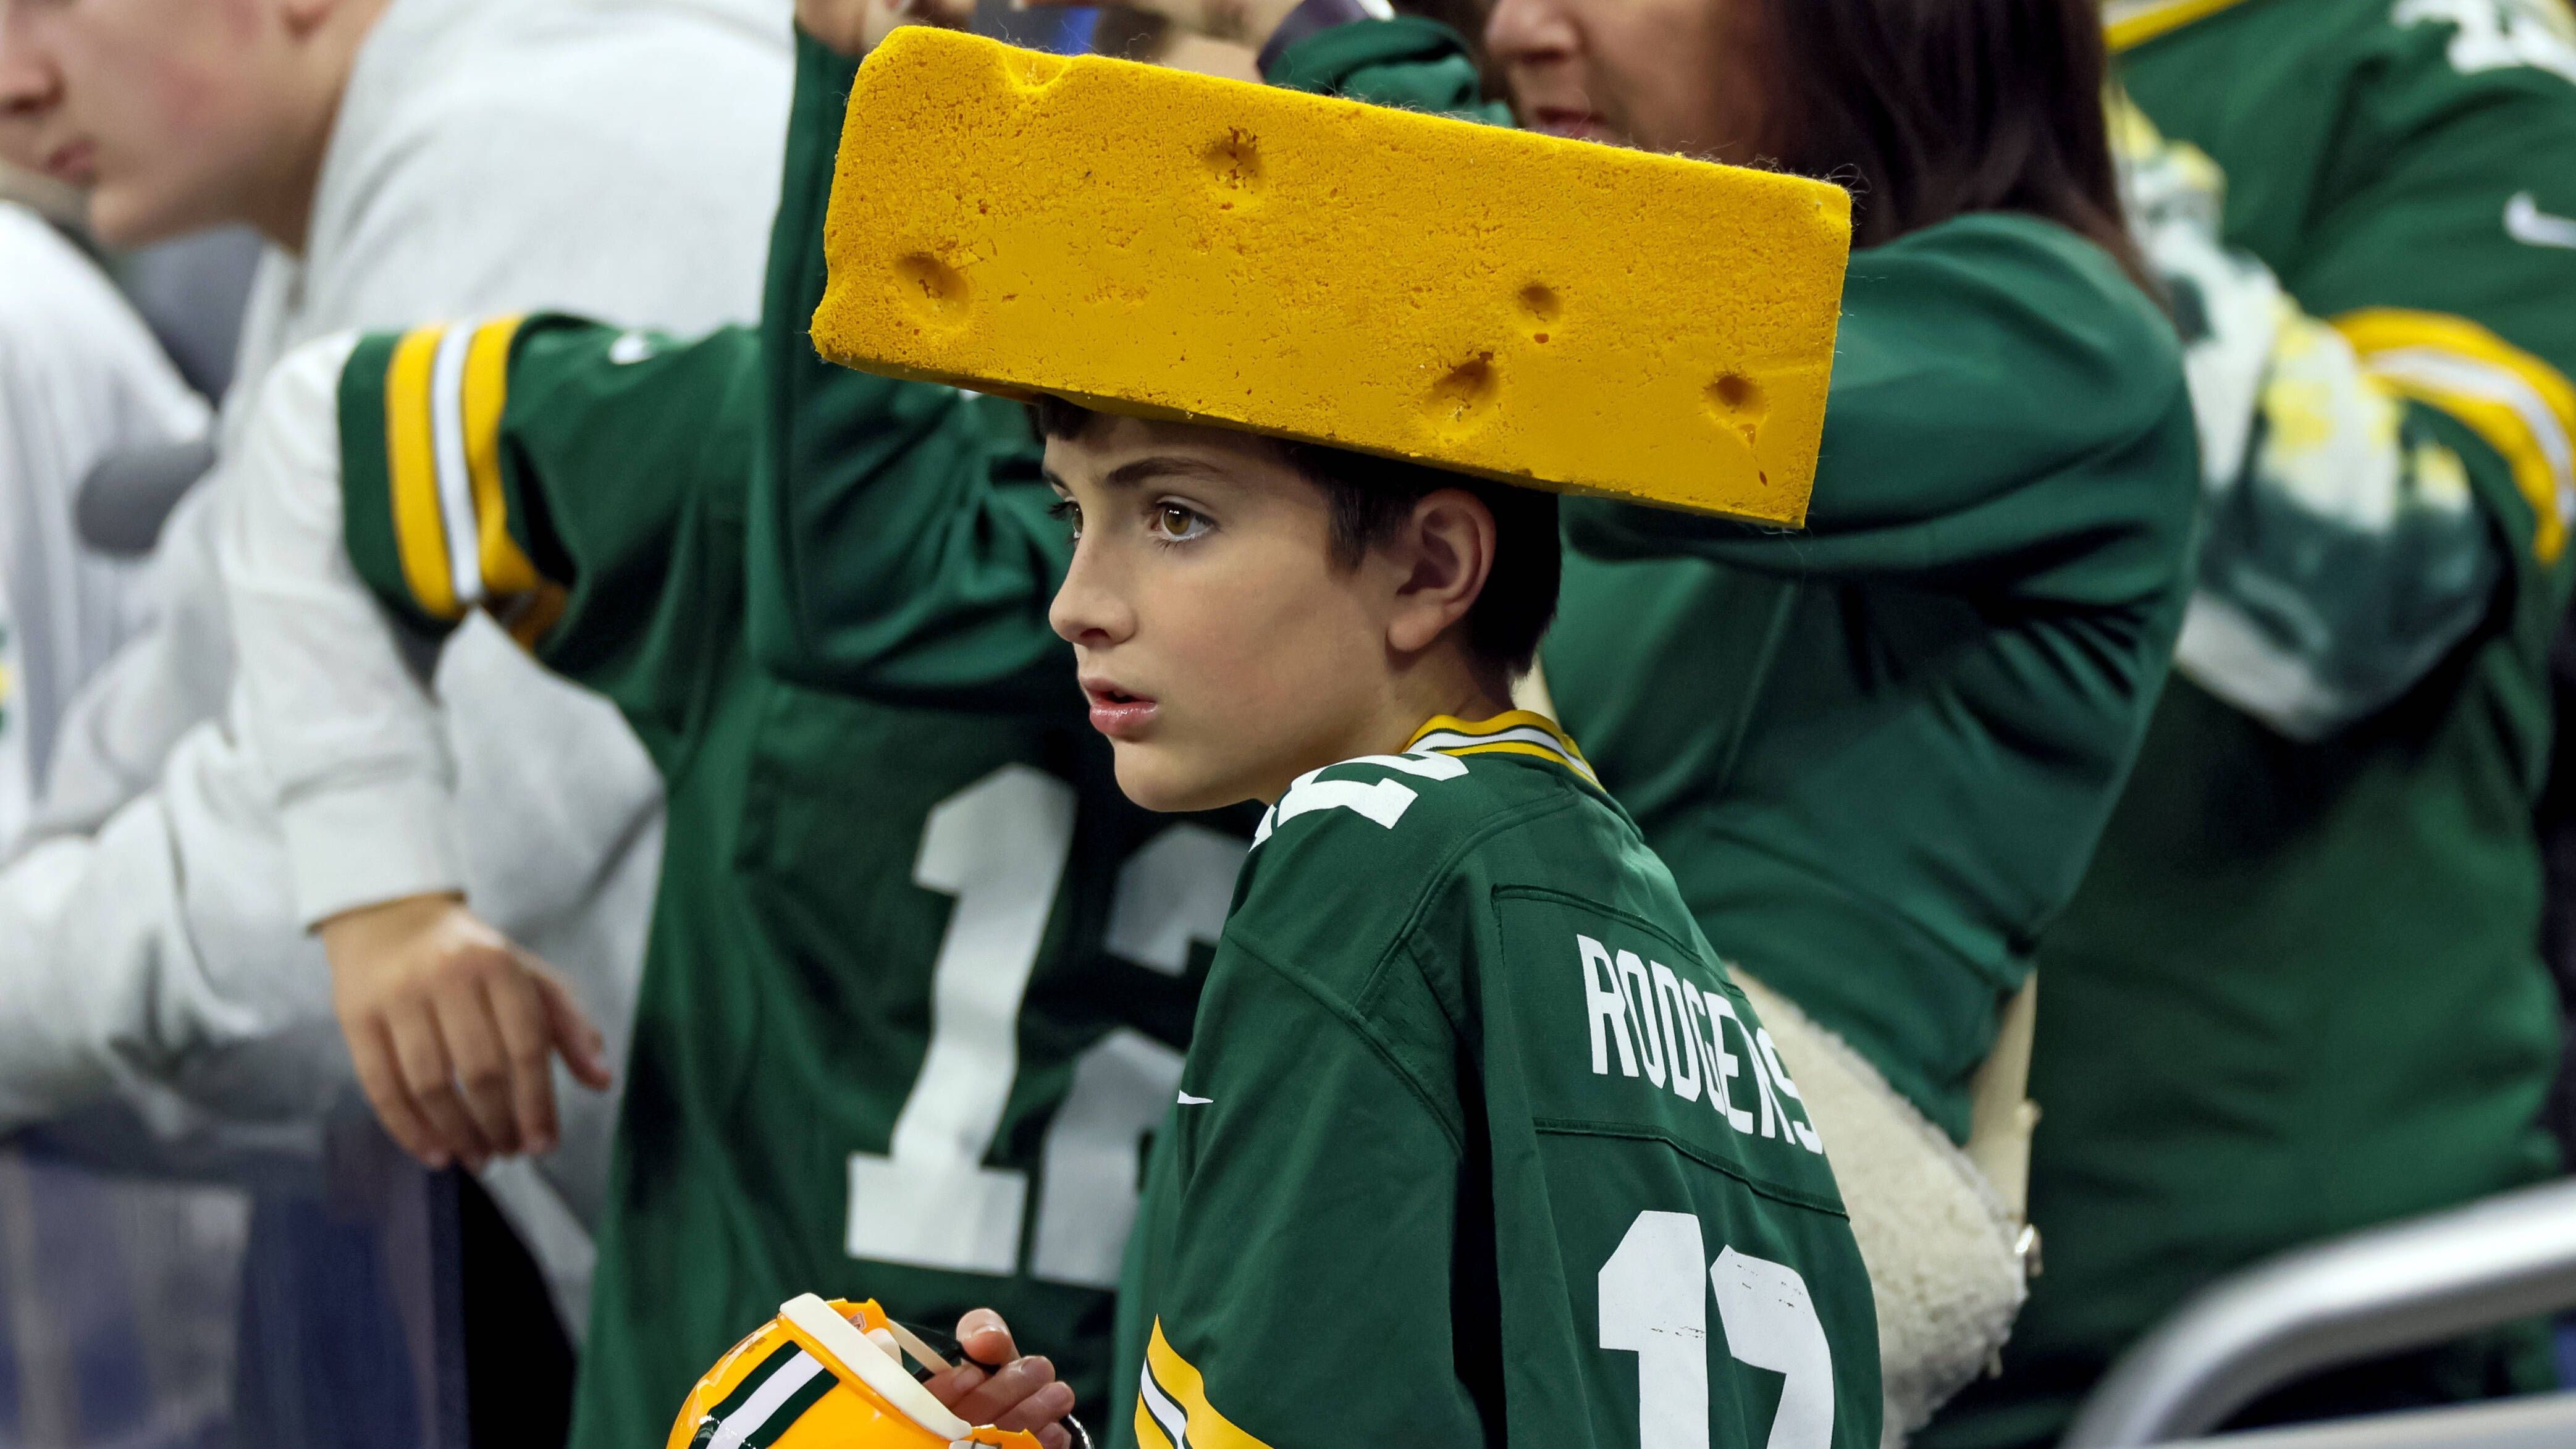 <strong>Green Bay Packers</strong><br>Englisch: "Why are the Packers called cheeseheads?"<br>Deutsch: "Warum werden die Packers Cheeseheads genannt?"